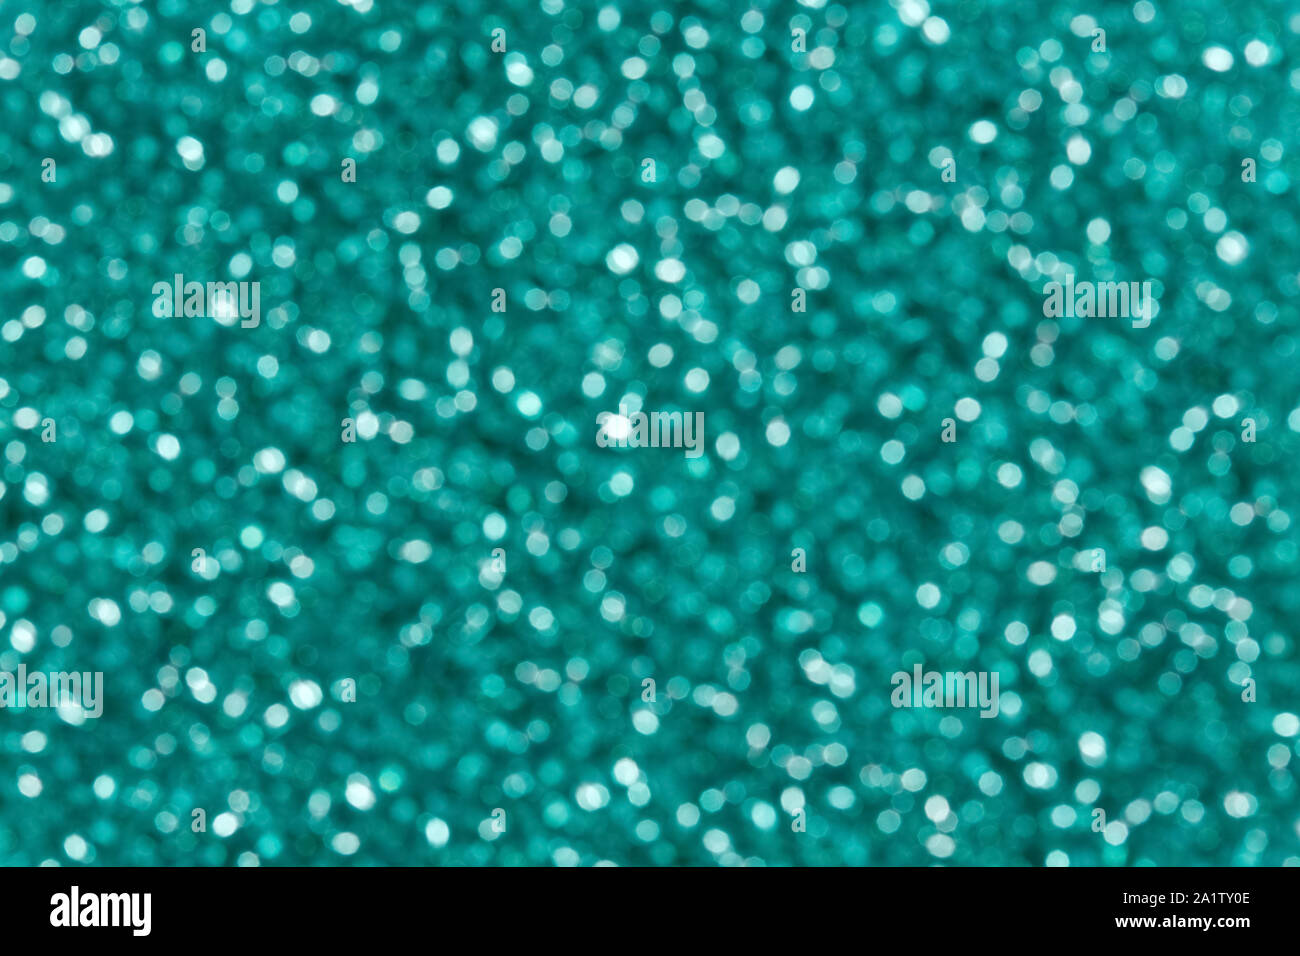 Abstract green and blue color bokeh background. Stock Photo